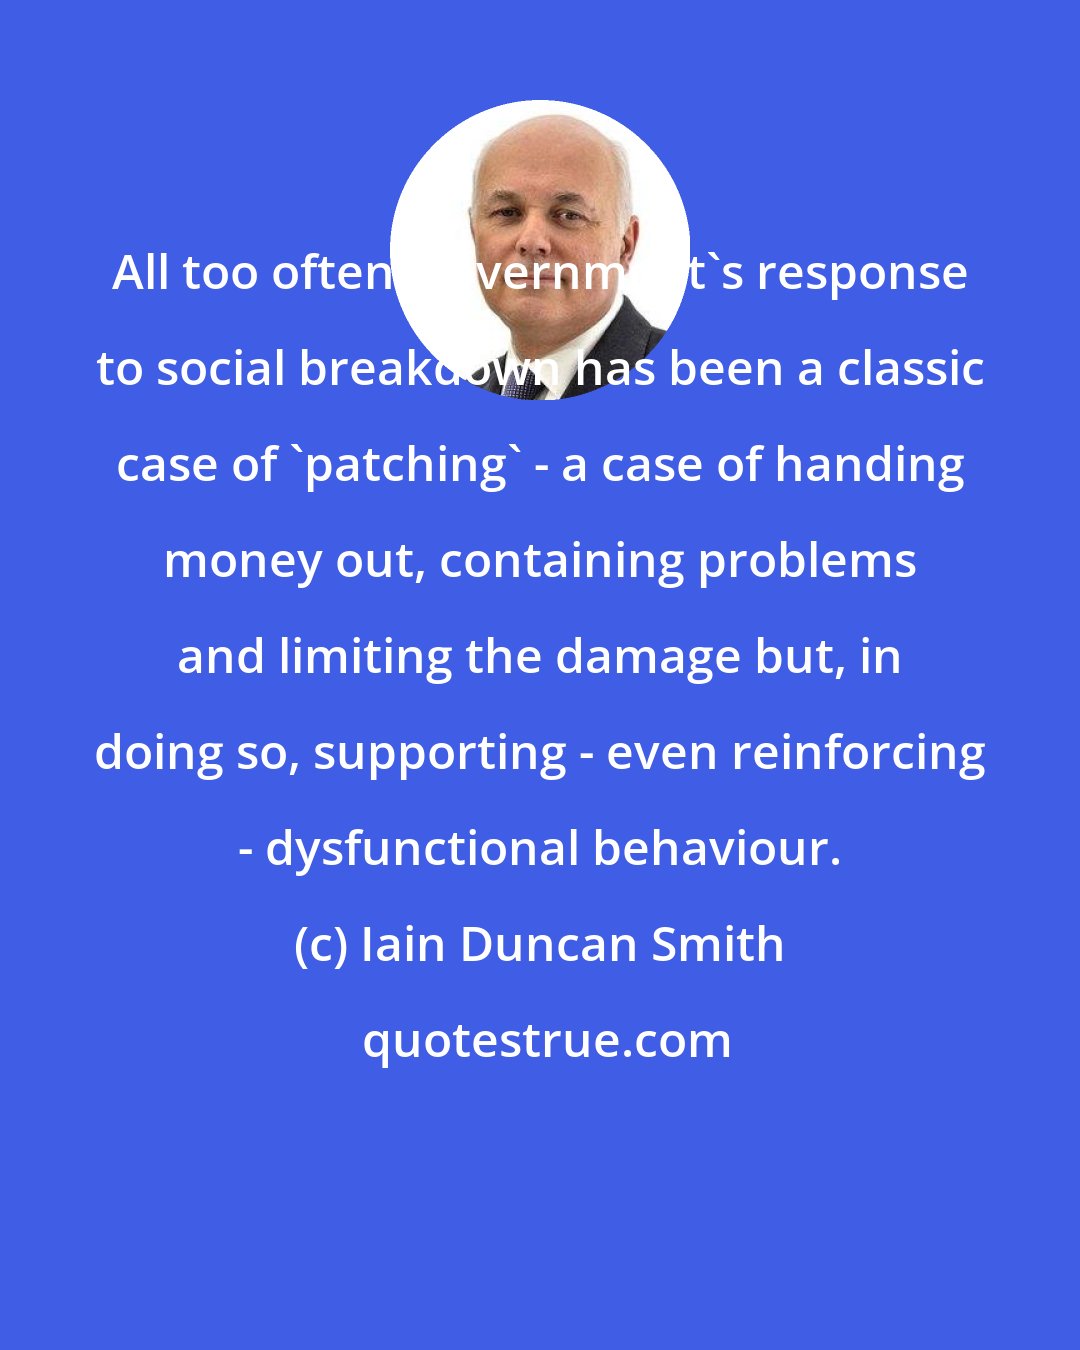 Iain Duncan Smith: All too often, government's response to social breakdown has been a classic case of 'patching' - a case of handing money out, containing problems and limiting the damage but, in doing so, supporting - even reinforcing - dysfunctional behaviour.